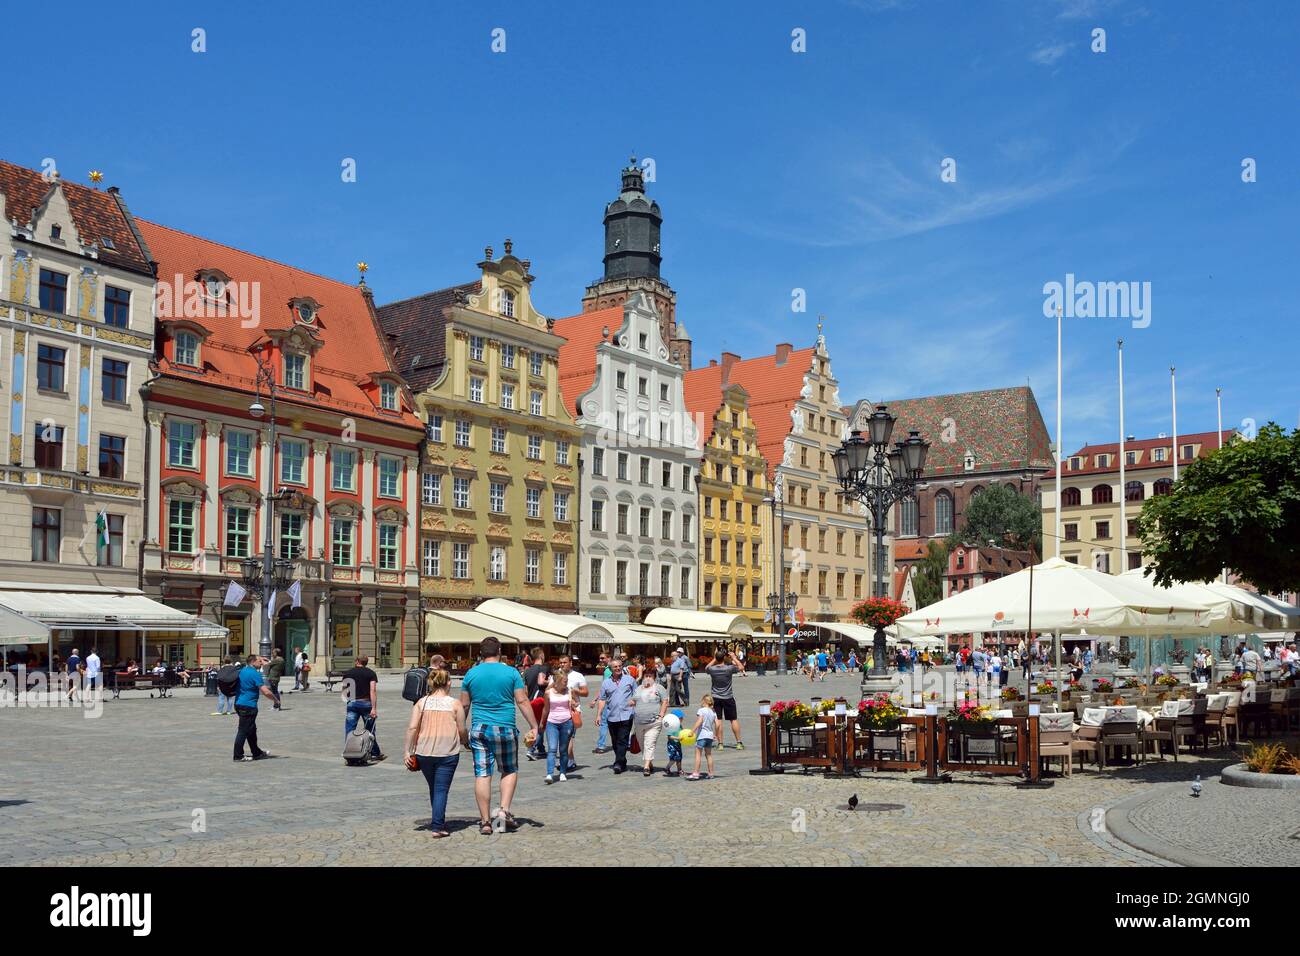 Wrocław, Lower Silesia, Poland - June 19, 2016: Peoplewalking in the Market Square in the historical Old Town of Wroclaw in Poland. Stock Photo